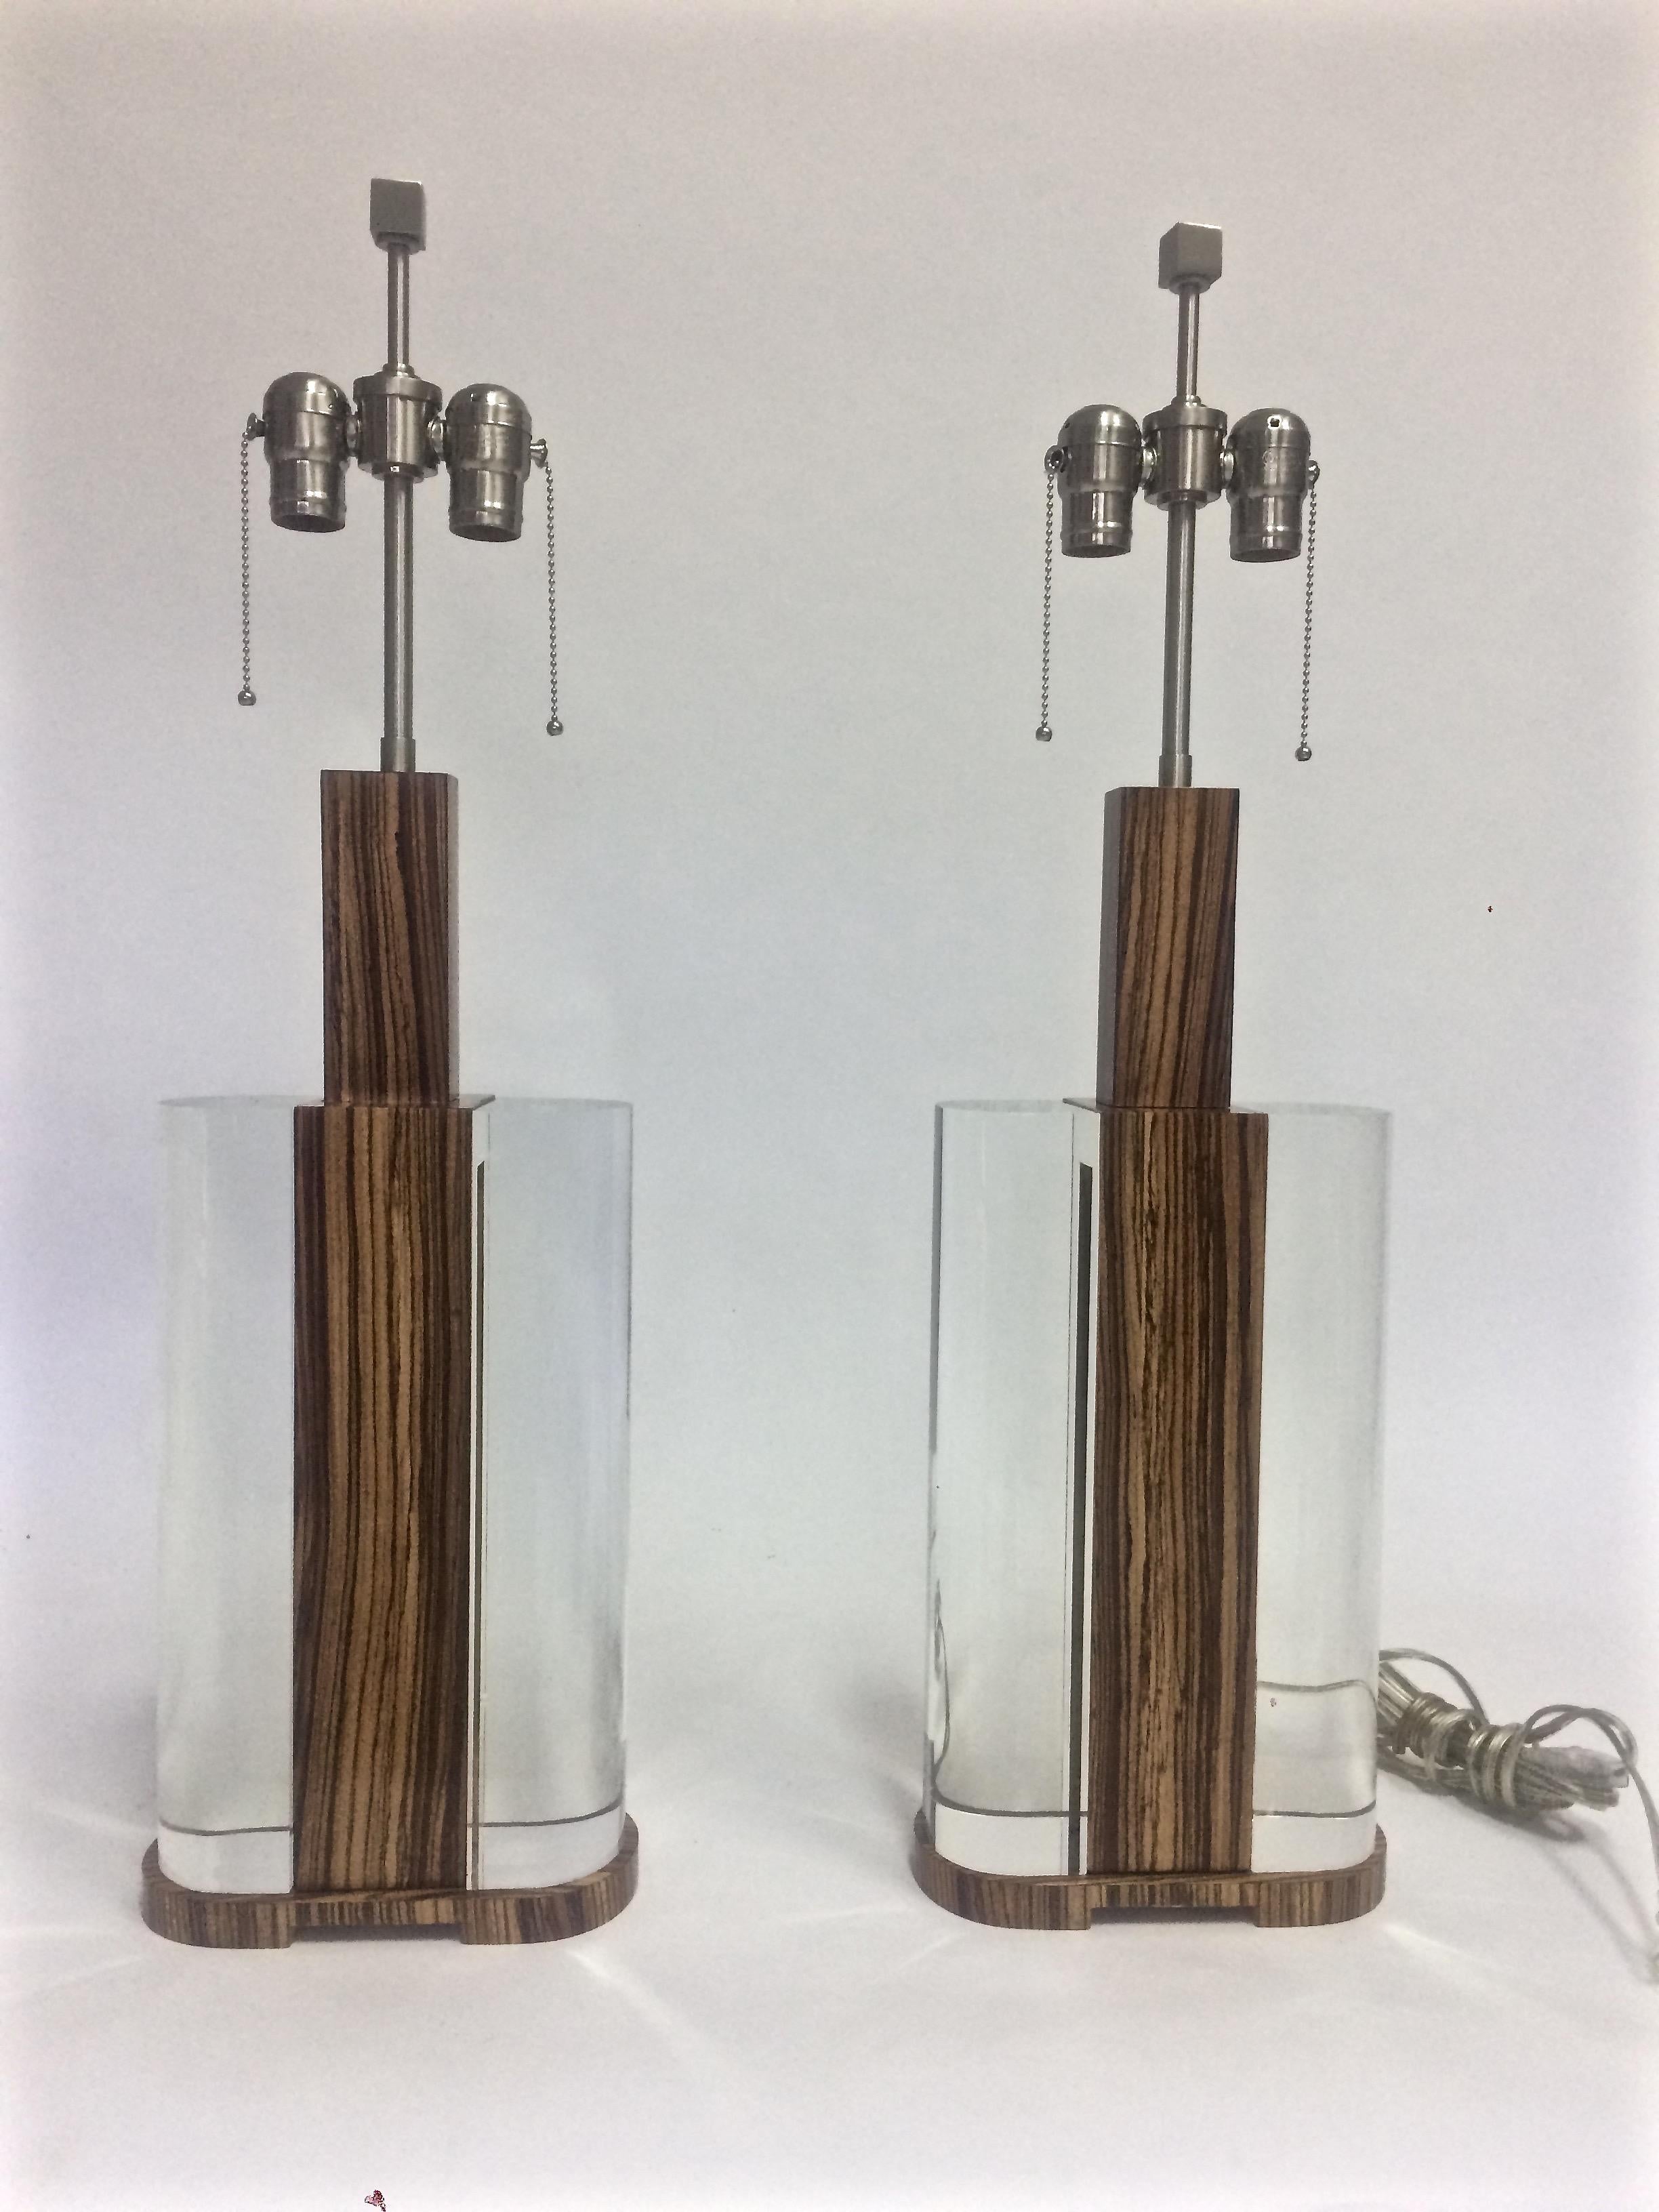 Mid-Century Modern acrylic and zebra wood pair of lamps, the solid satin stainless steel dual light sockets with a square finial to lock the shade and an on/off pull chain over a supporting zebra wood standard, the body is comprised of a massive